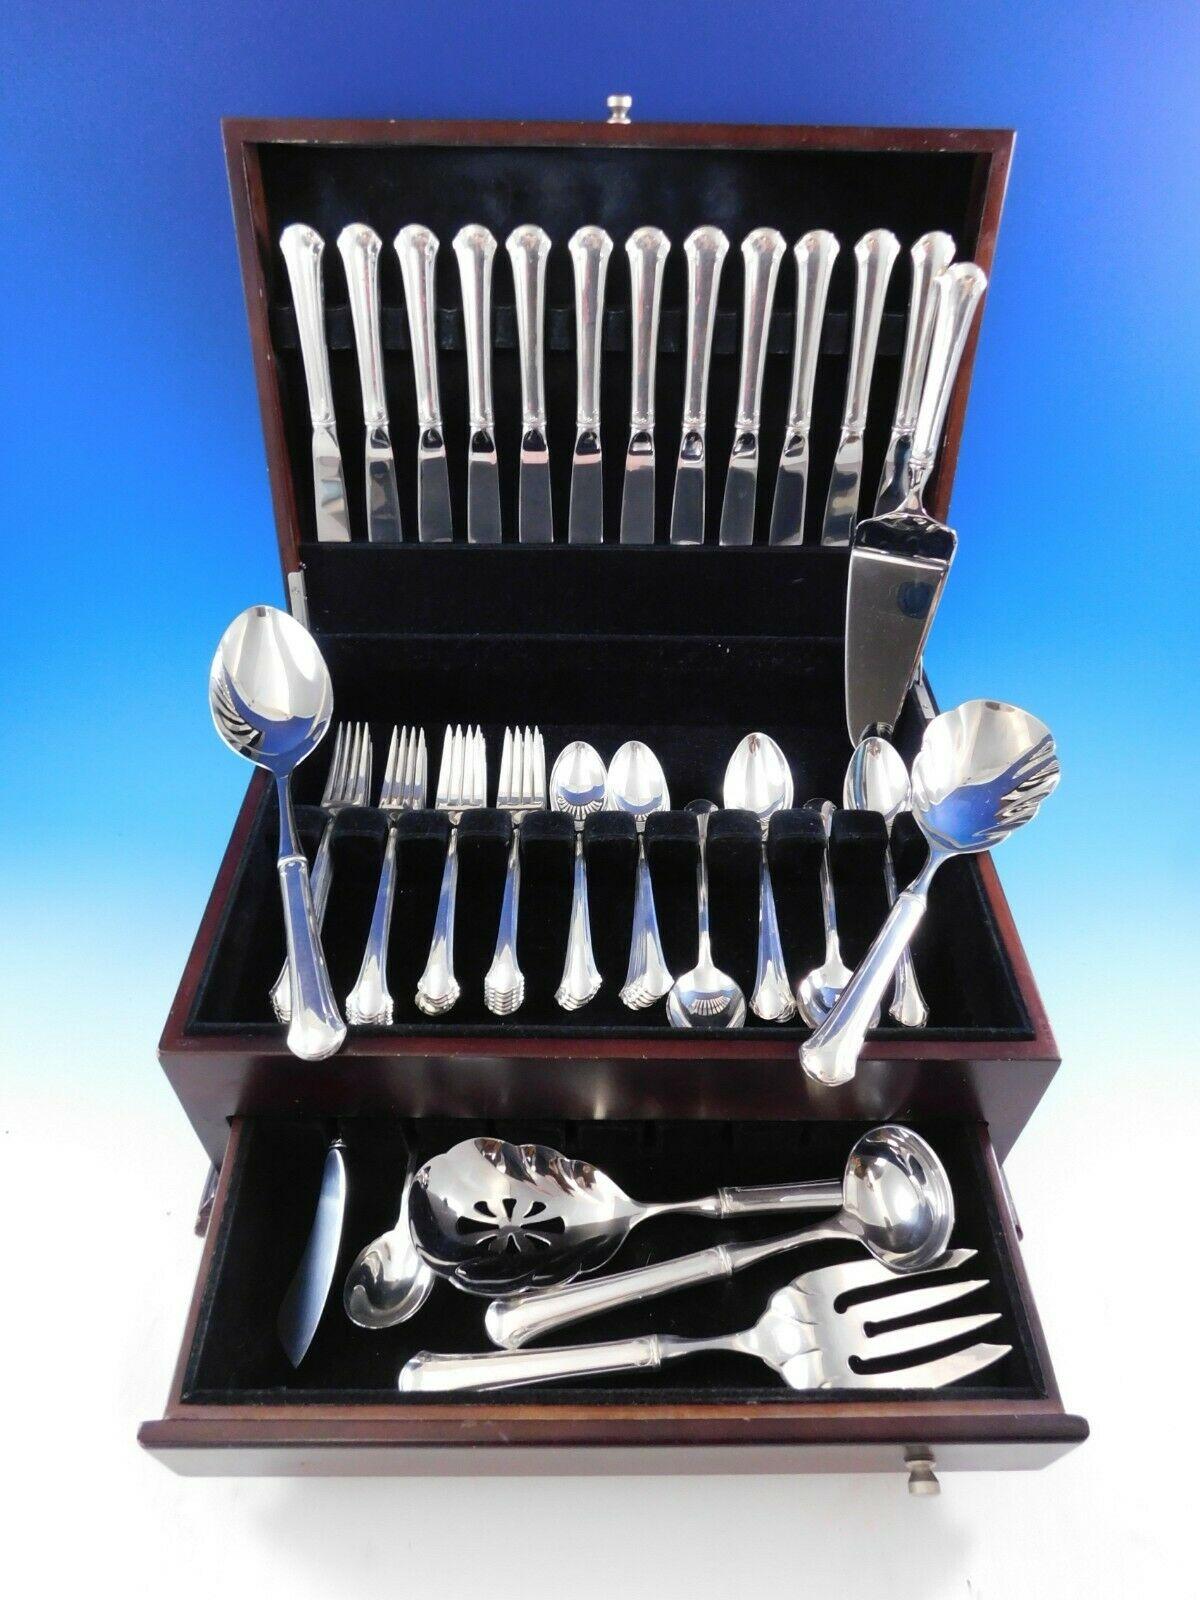 Chippendale by Towle Sterling Silver flatware set - 68 pieces. This set includes:

12 knives, 8 3/4